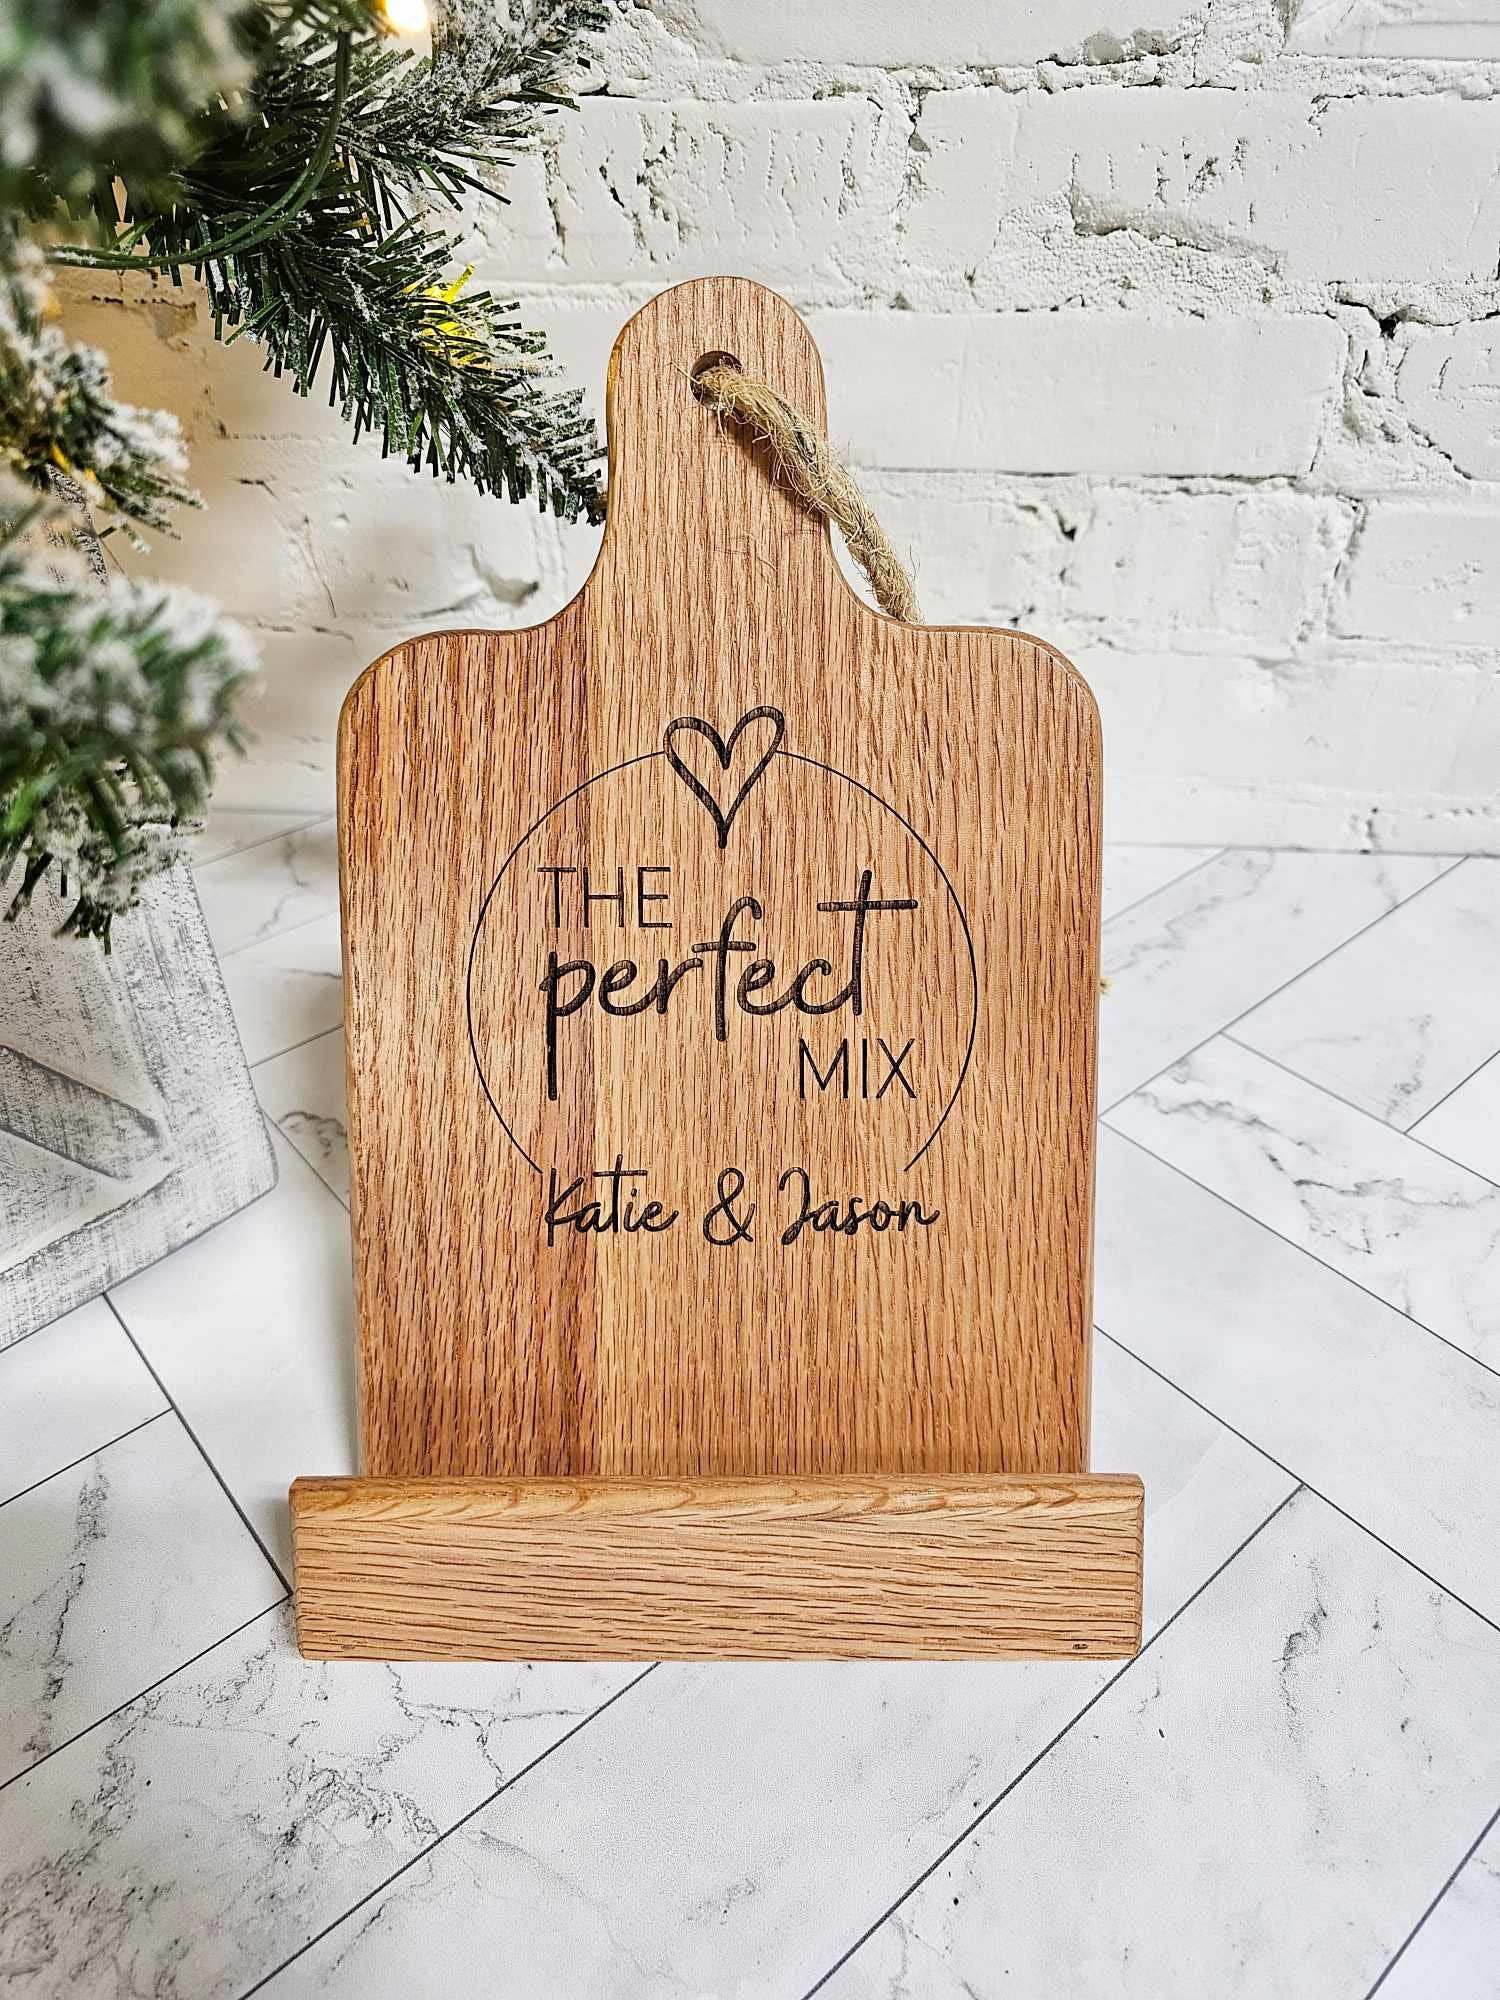 CookBook / Recipe Holder, Personalized Christmas Gift for Couple, Engraved Custom Wooden Oak Tablet Stand for Kitchen Counter, Gift for Him